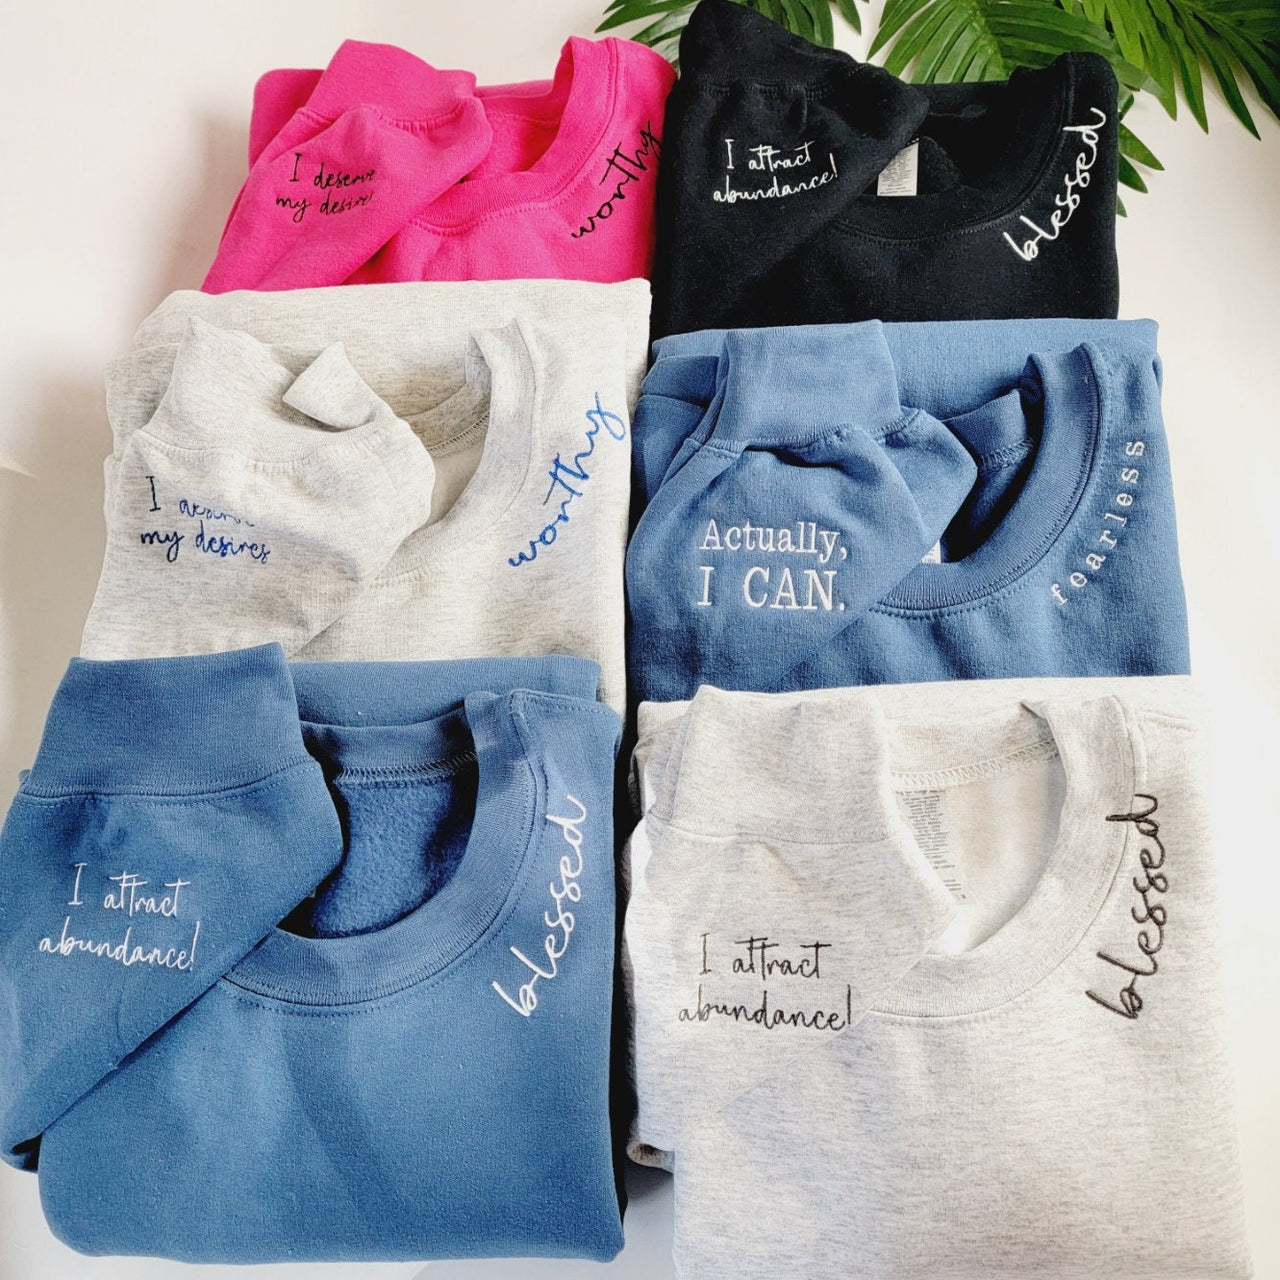 Custom Embroidered Sweatshirt For Women or Men - Neckline Embroidered Sleeve - Gift for Her - Monogrammed Sweatshirt - Trendy Sweatshirt